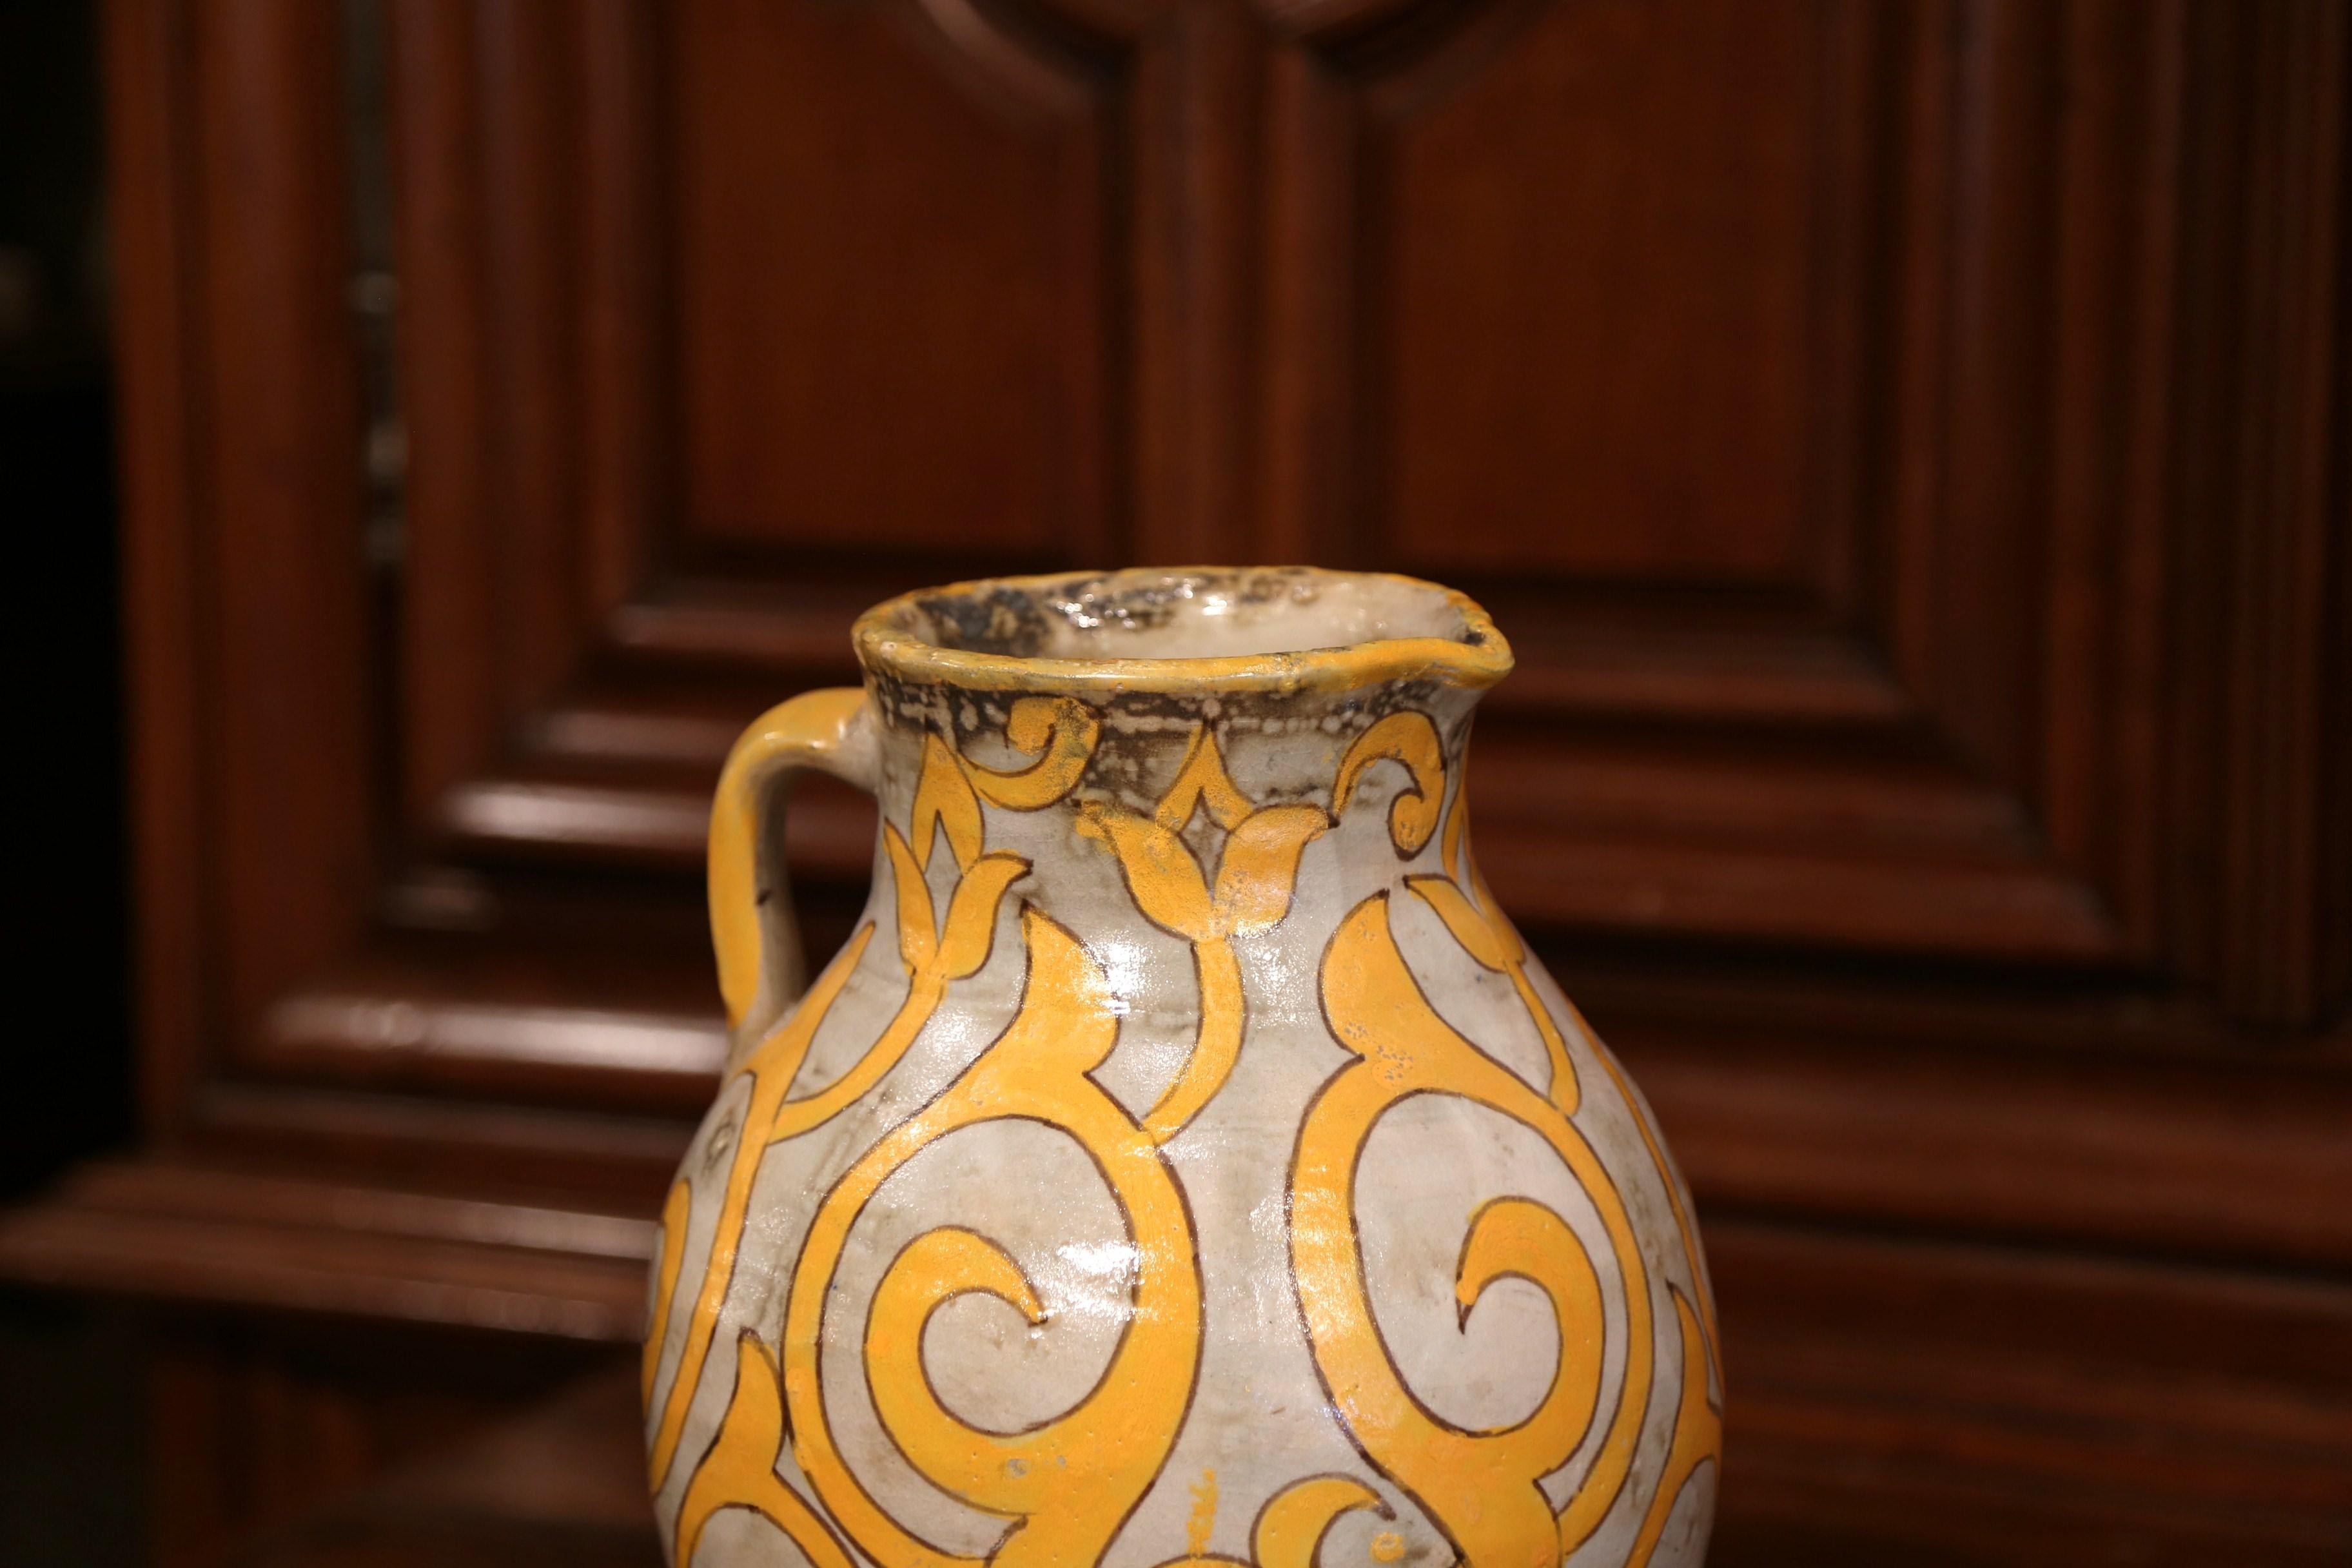 Embellish your kitchen or your bar area with this colorful antique cider pitcher from Normandy; crafted circa 1920, the large beige ceramic jug with side handle, features hand-painted floral and scroll decor in the mustard palette. The tall water